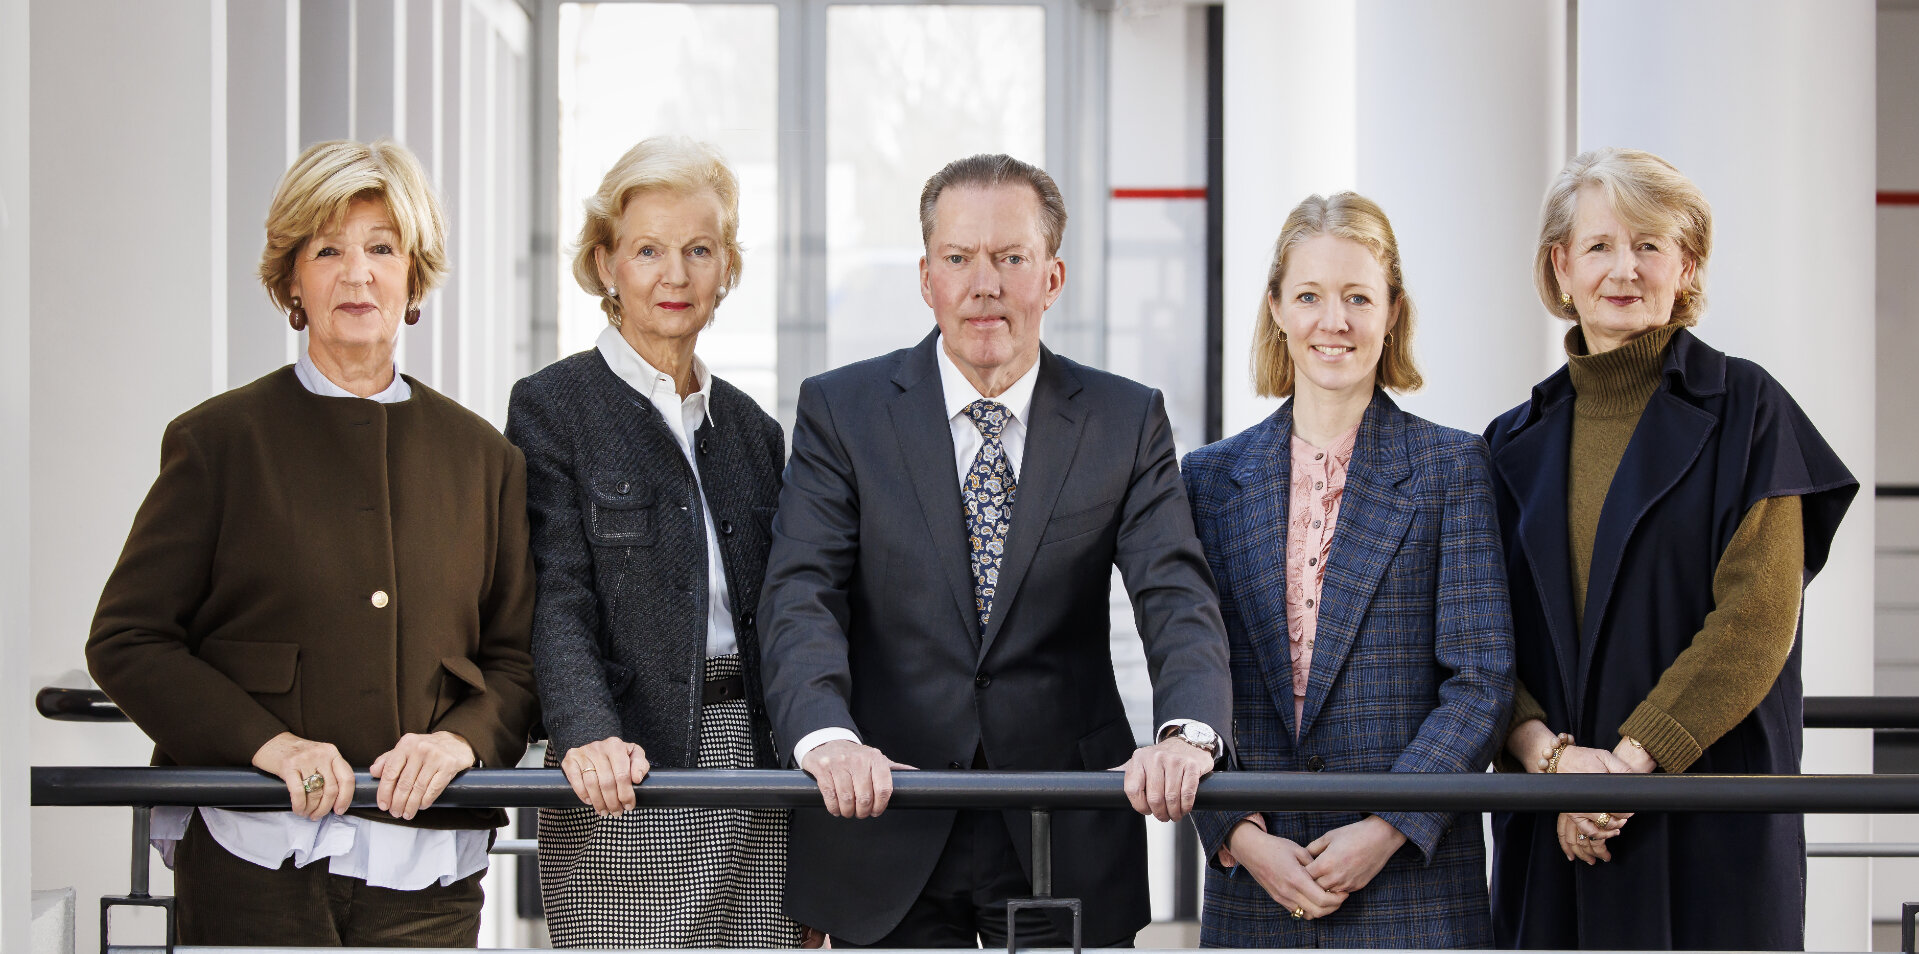 Foundation Board of the Friedel und Walter Hoyer-Stiftung